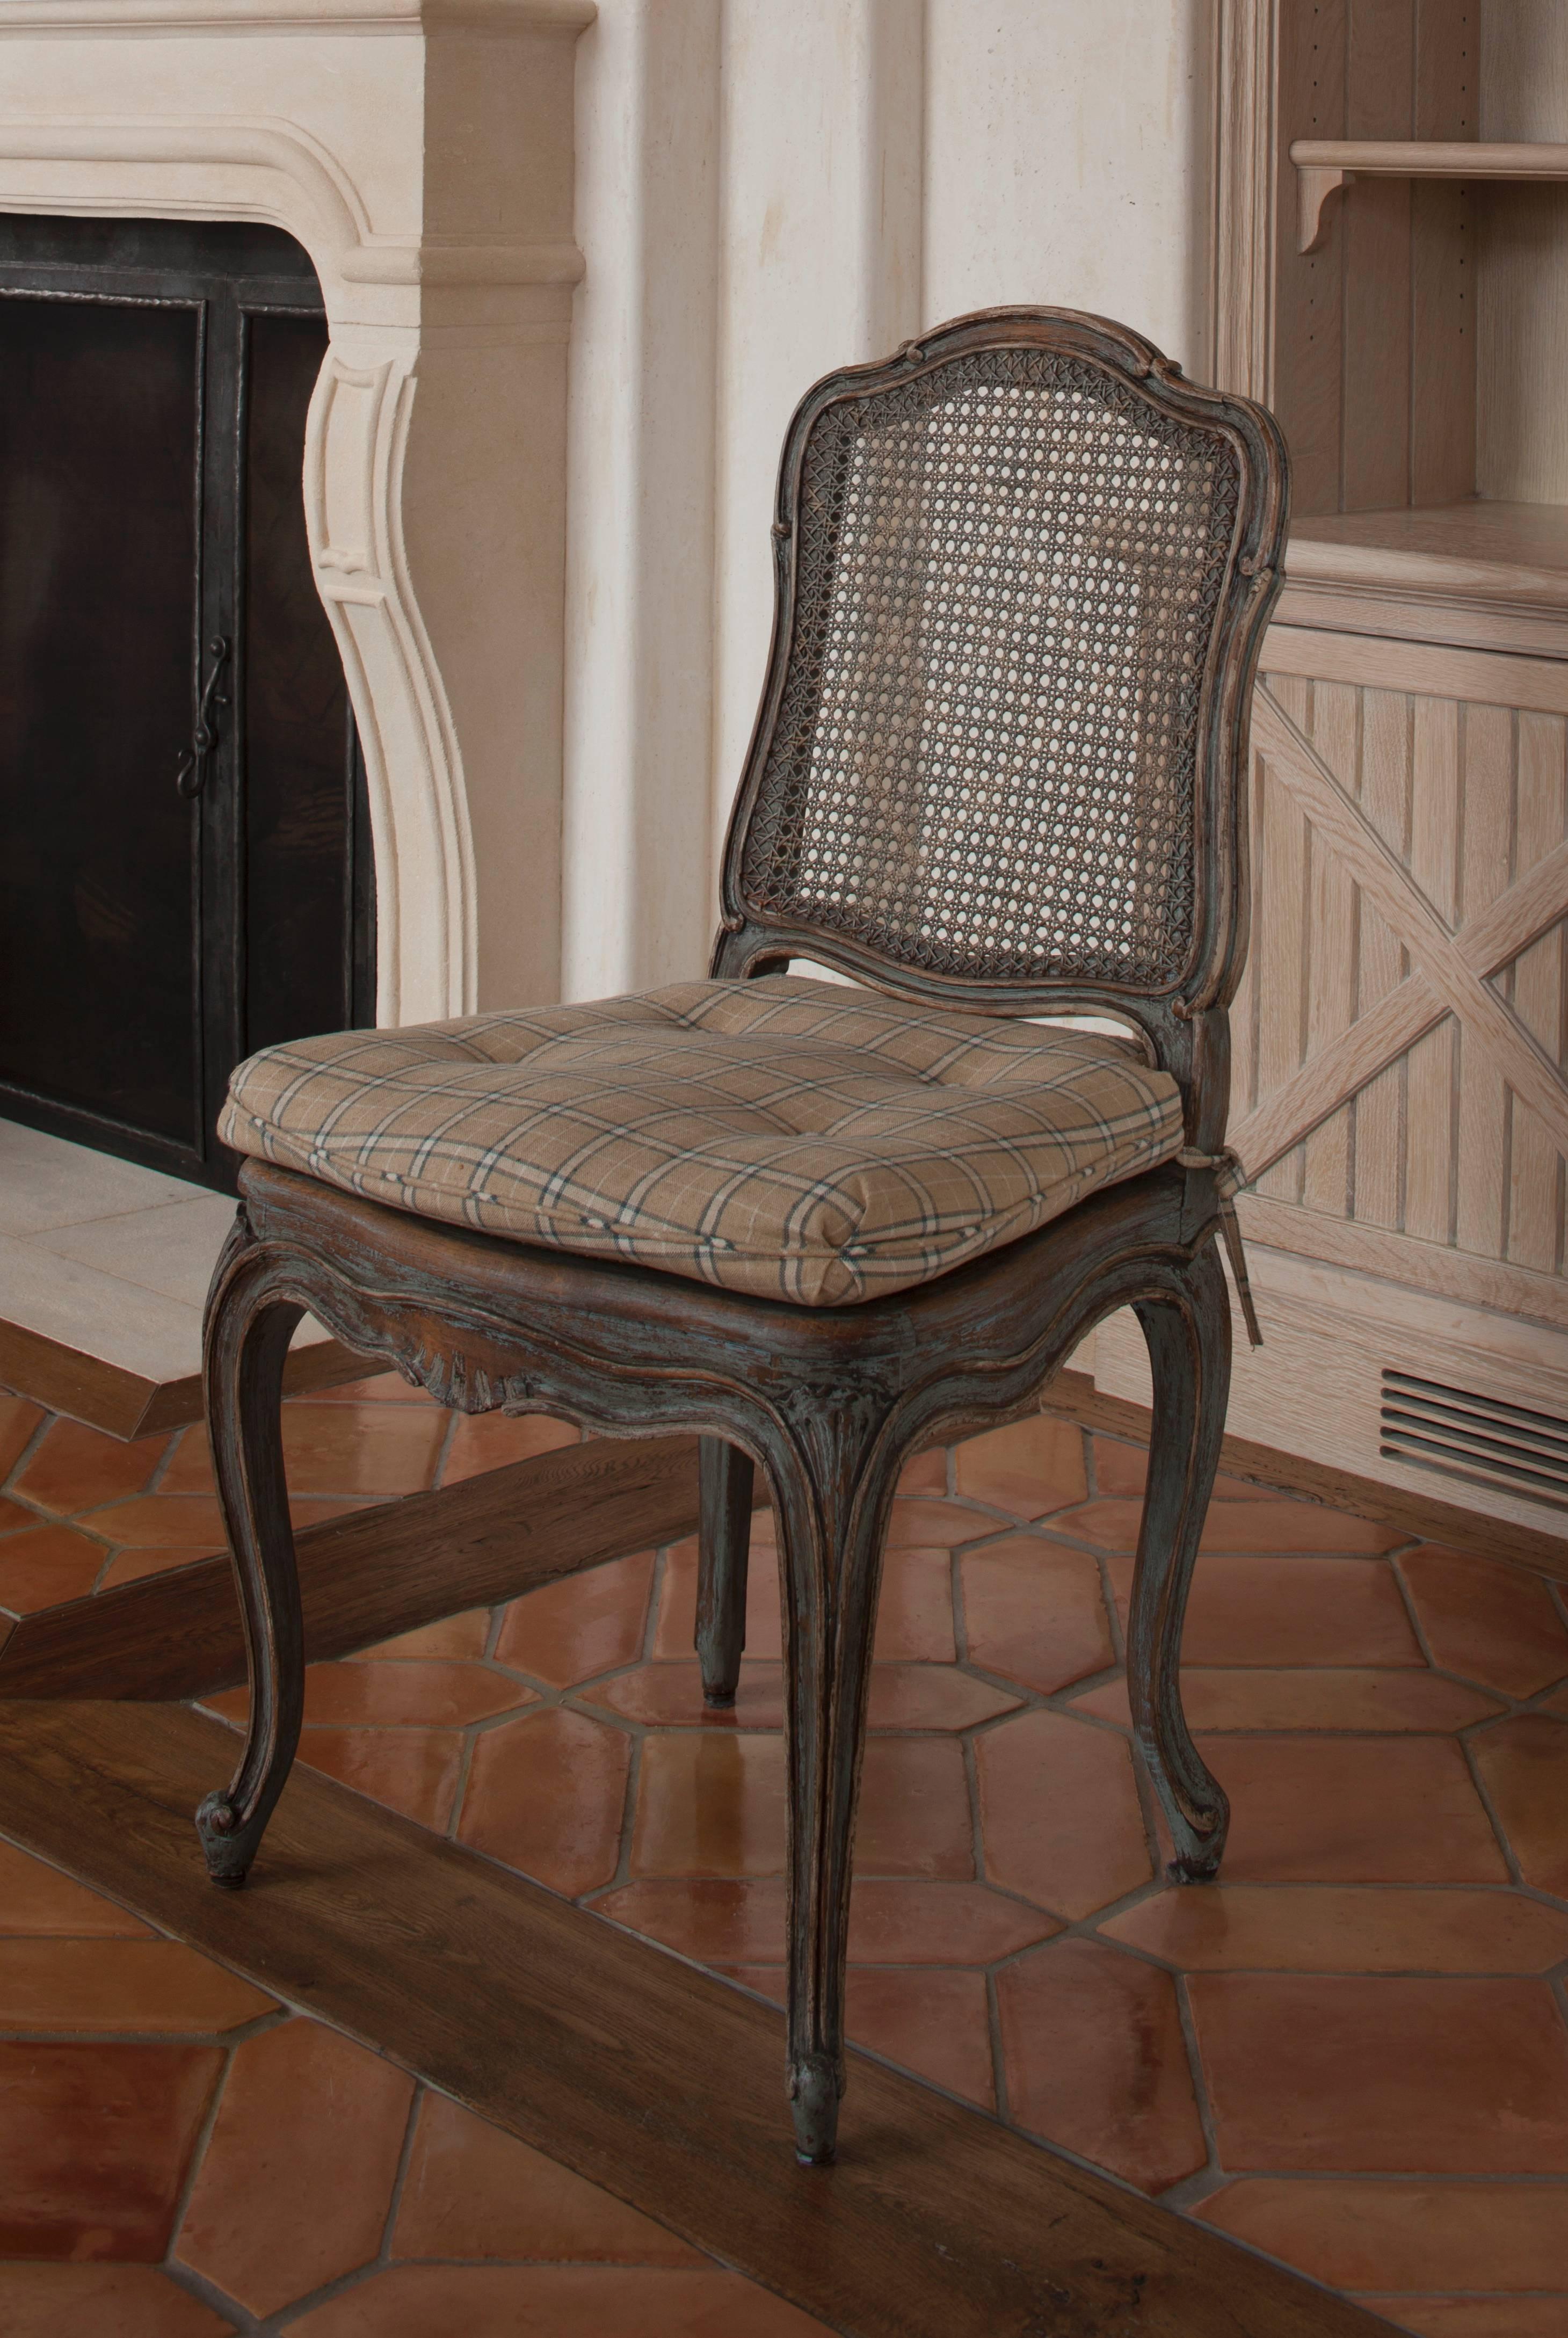 Beautifully made, hand-carved set of chairs after a period model.  Each made of oak with antique blue-grey painted finish.  The backs and seats caned.

Supplied by David Easton for a private residence.